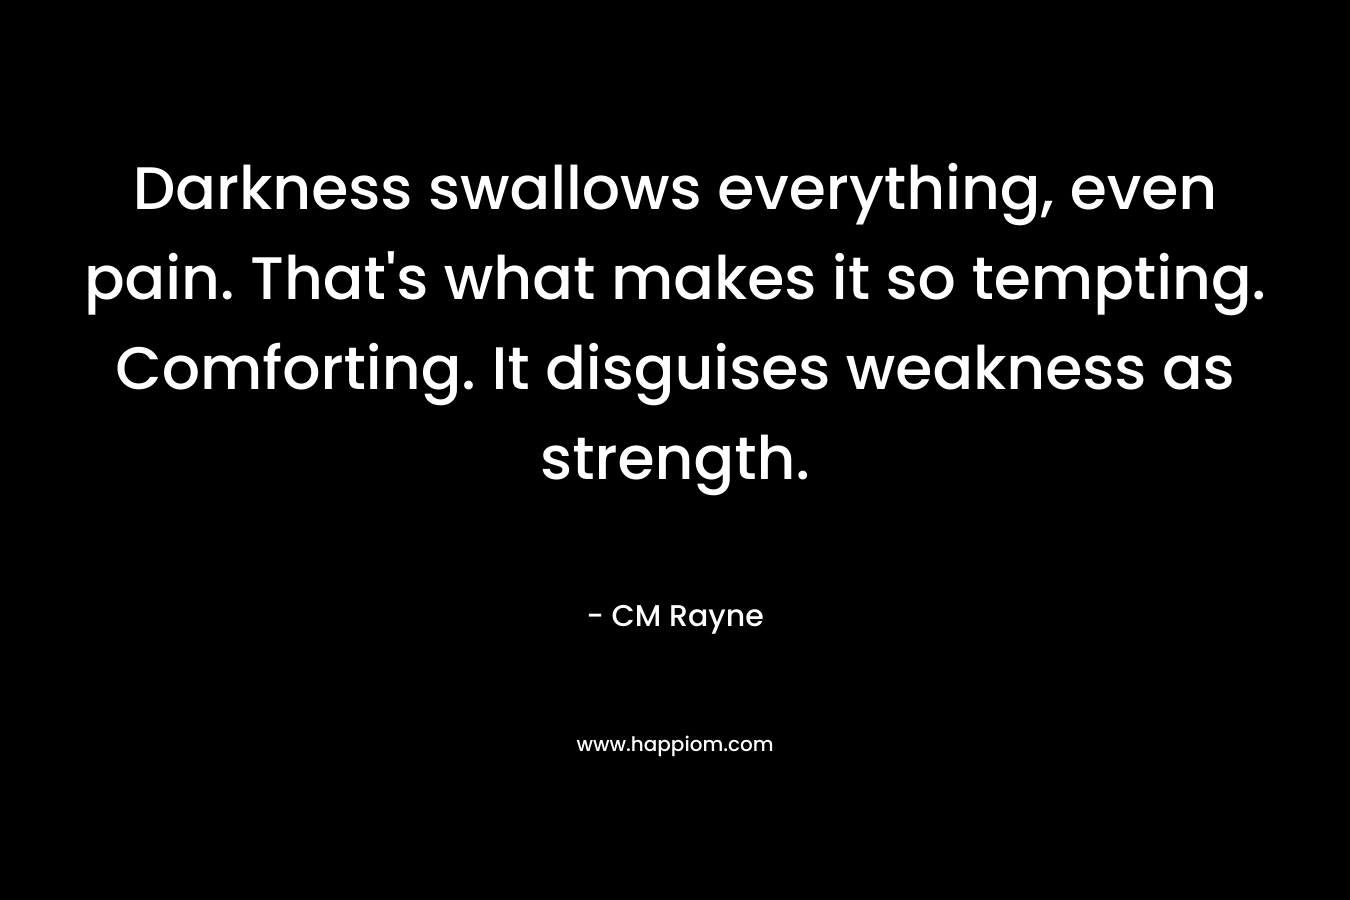 Darkness swallows everything, even pain. That’s what makes it so tempting. Comforting. It disguises weakness as strength. – CM Rayne